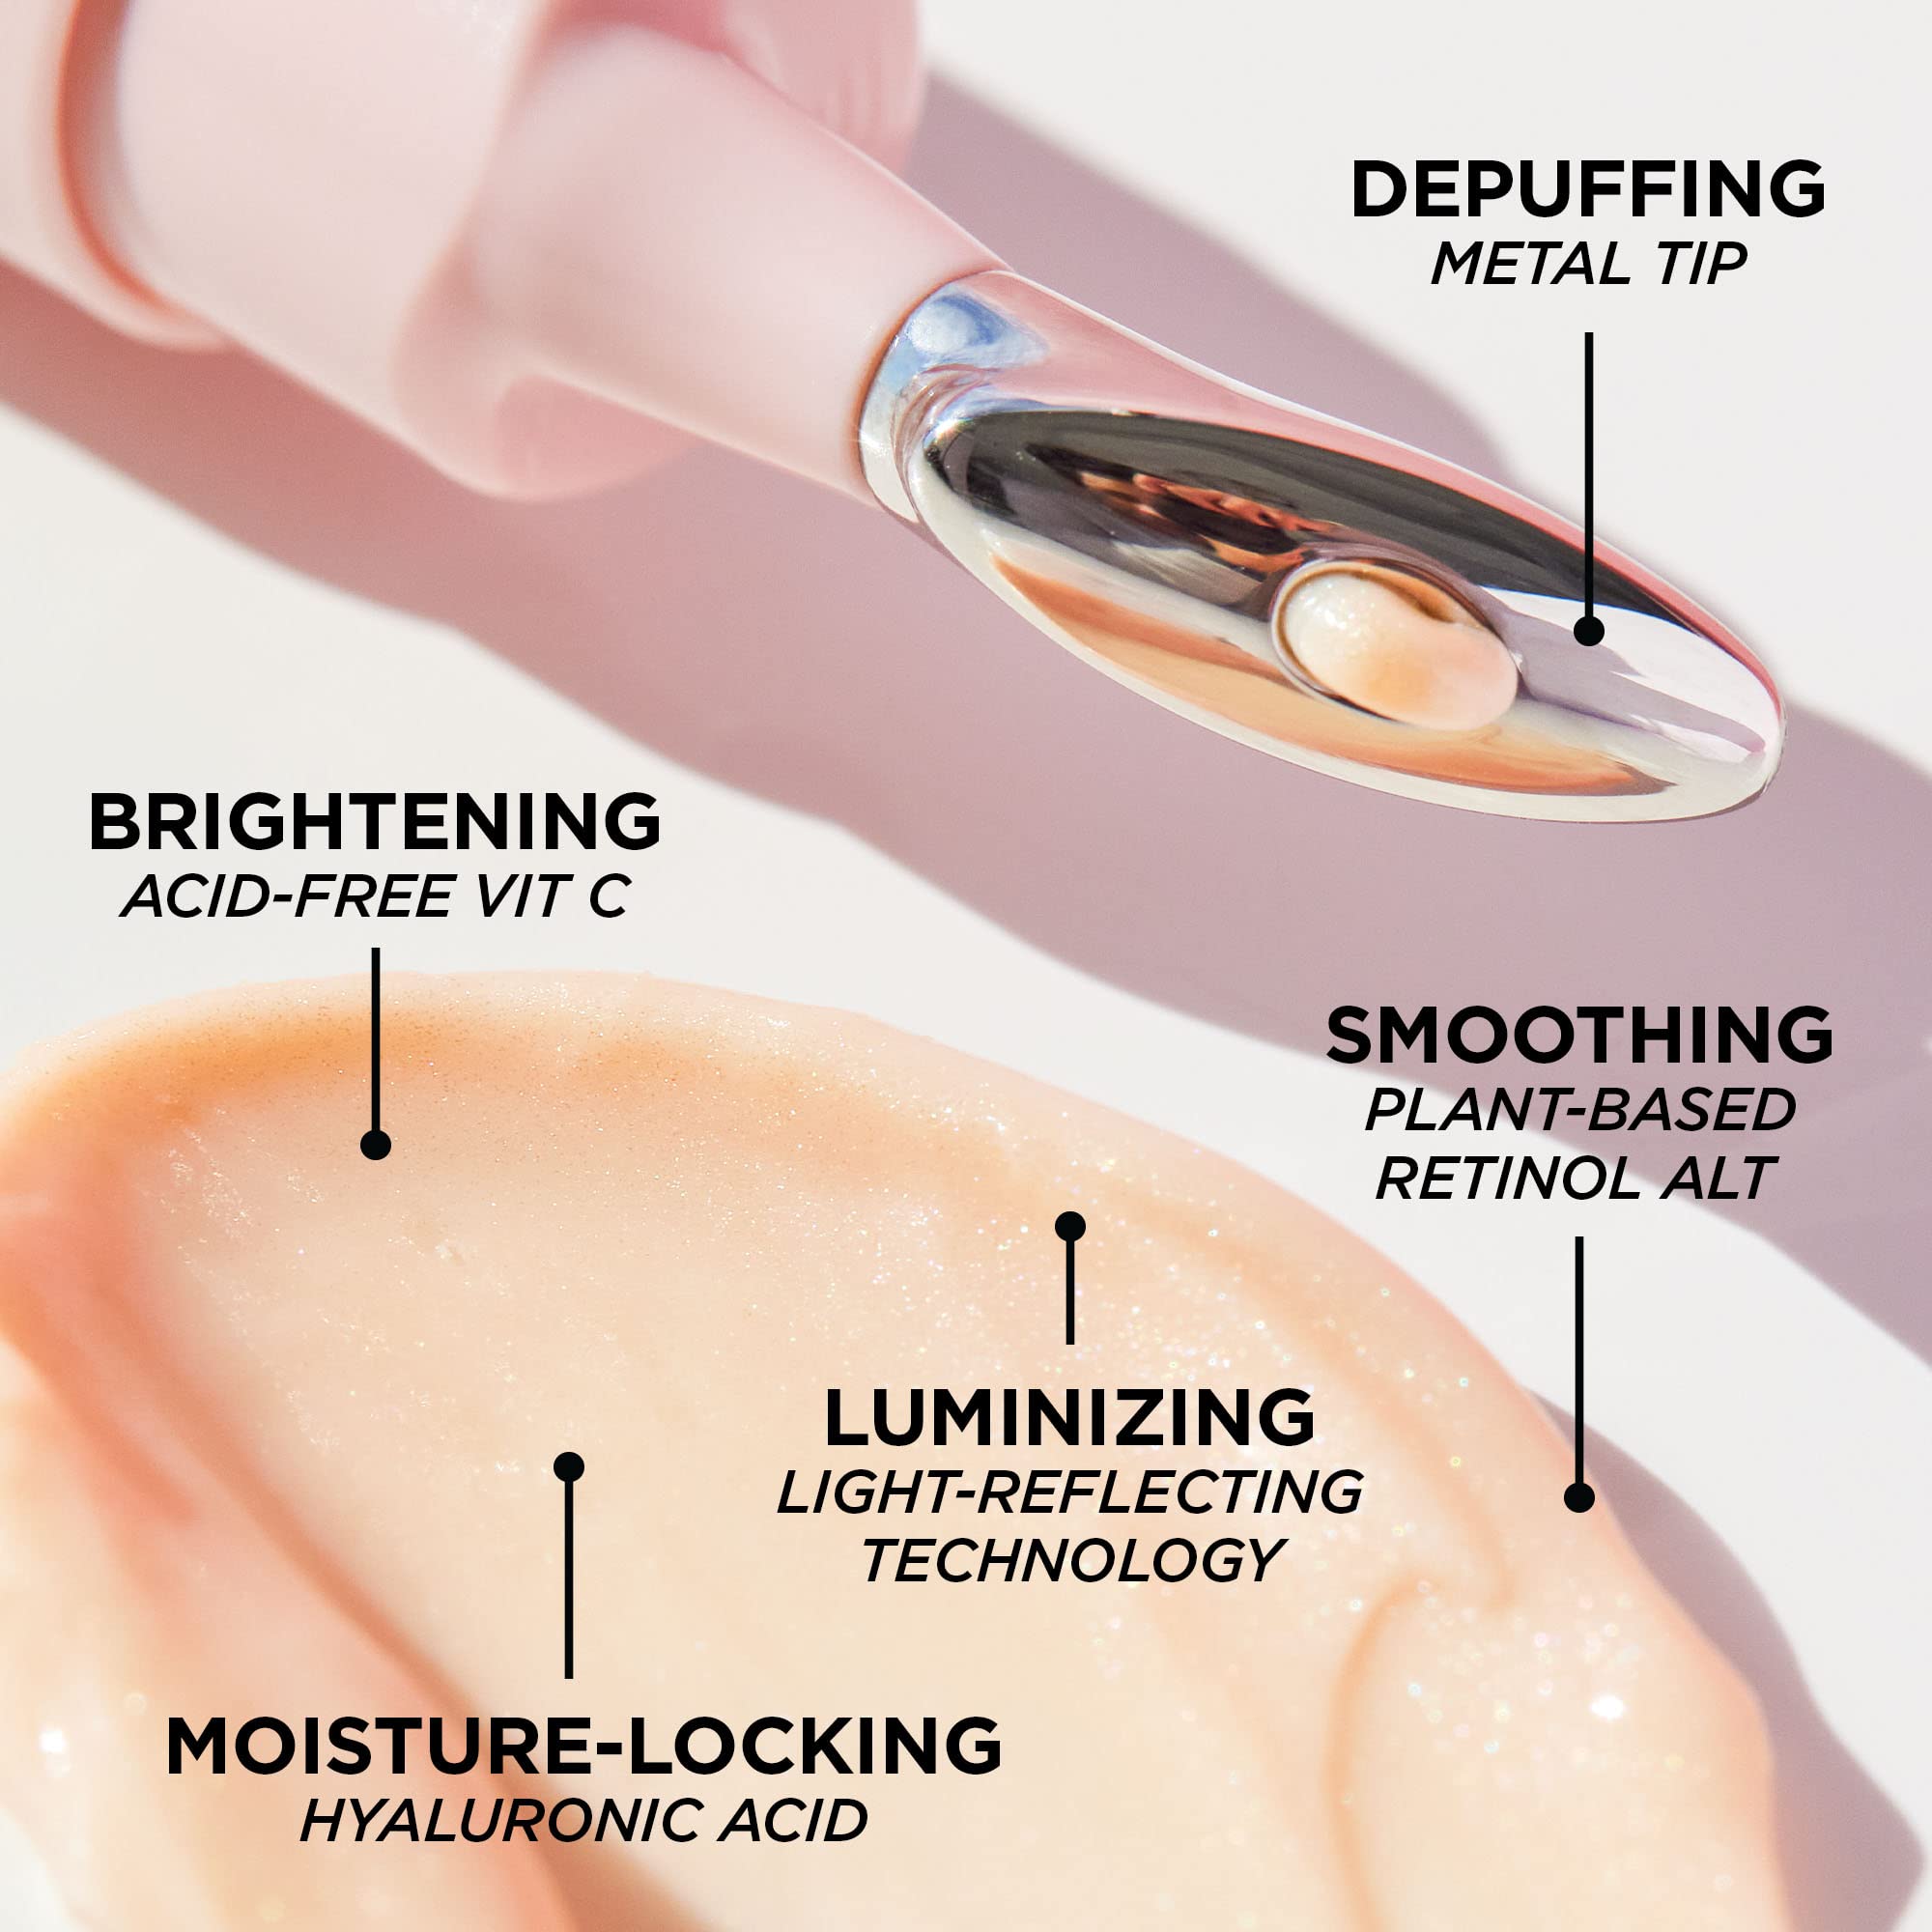 BeautyBio The Eyelighter Concentrate. Smoothing, Brightening & Priming Serum + Depuffing Tool, 1 ct.